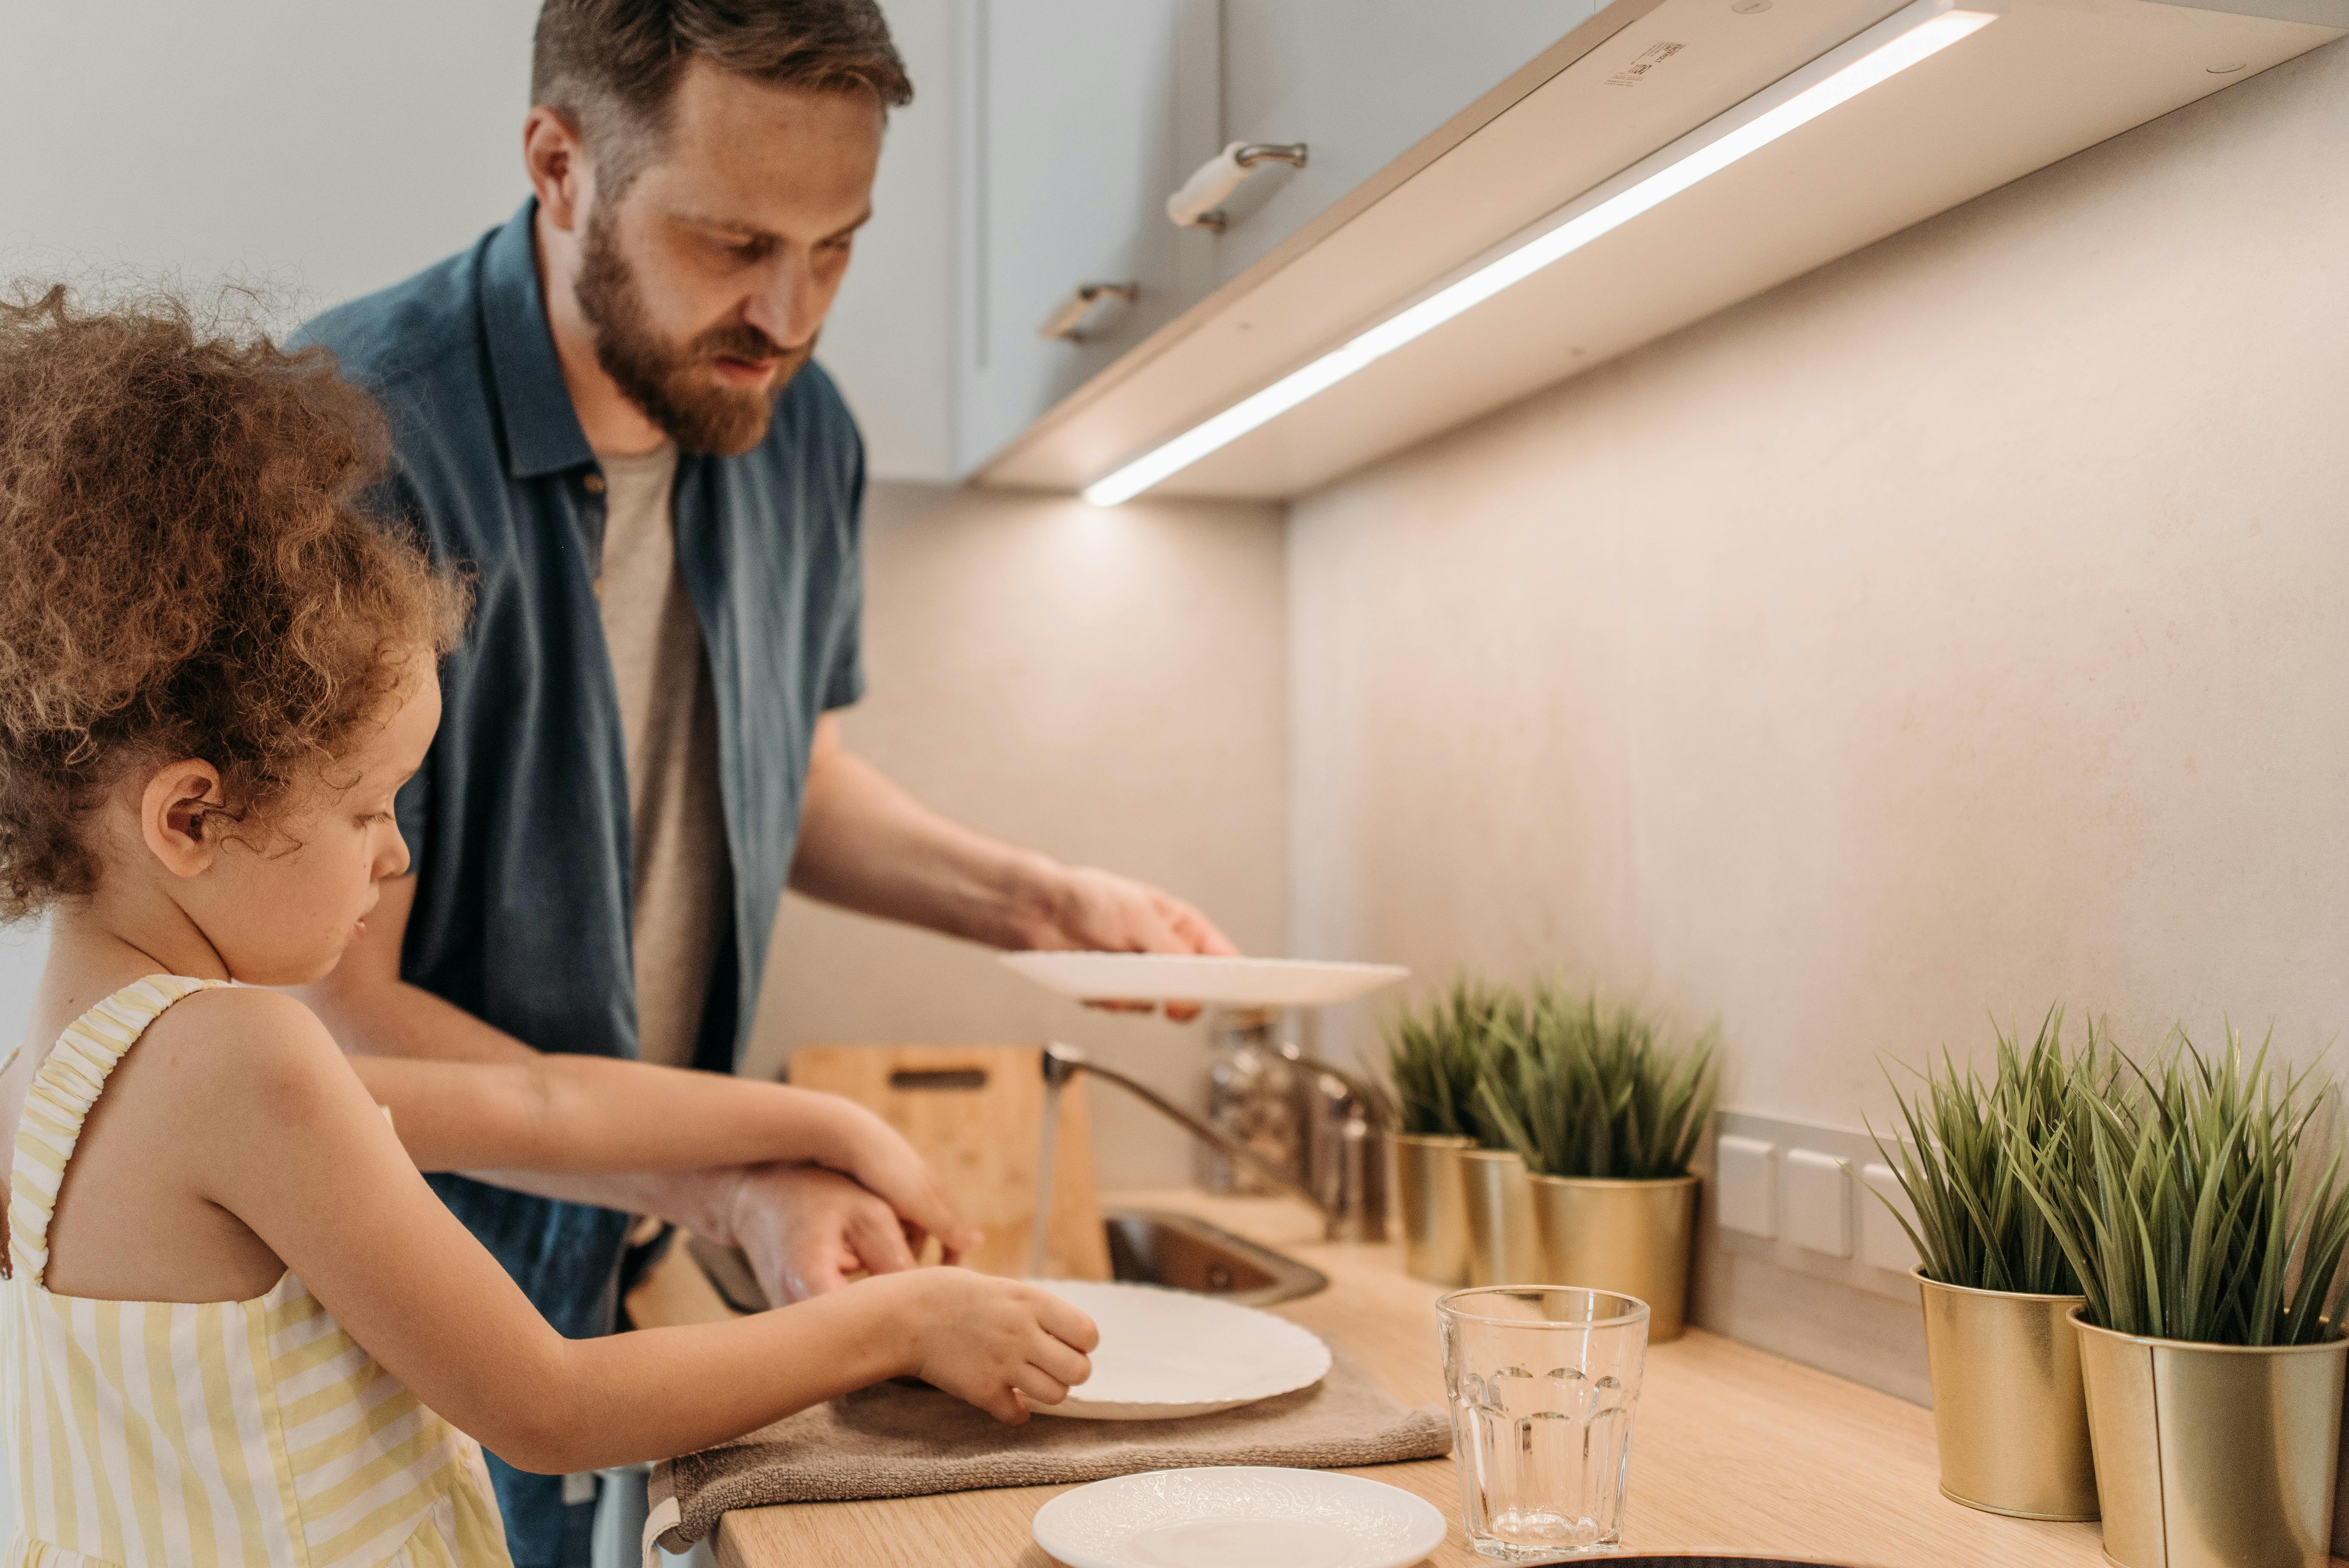 A man washing dishes with his daughter | Source: Pexels